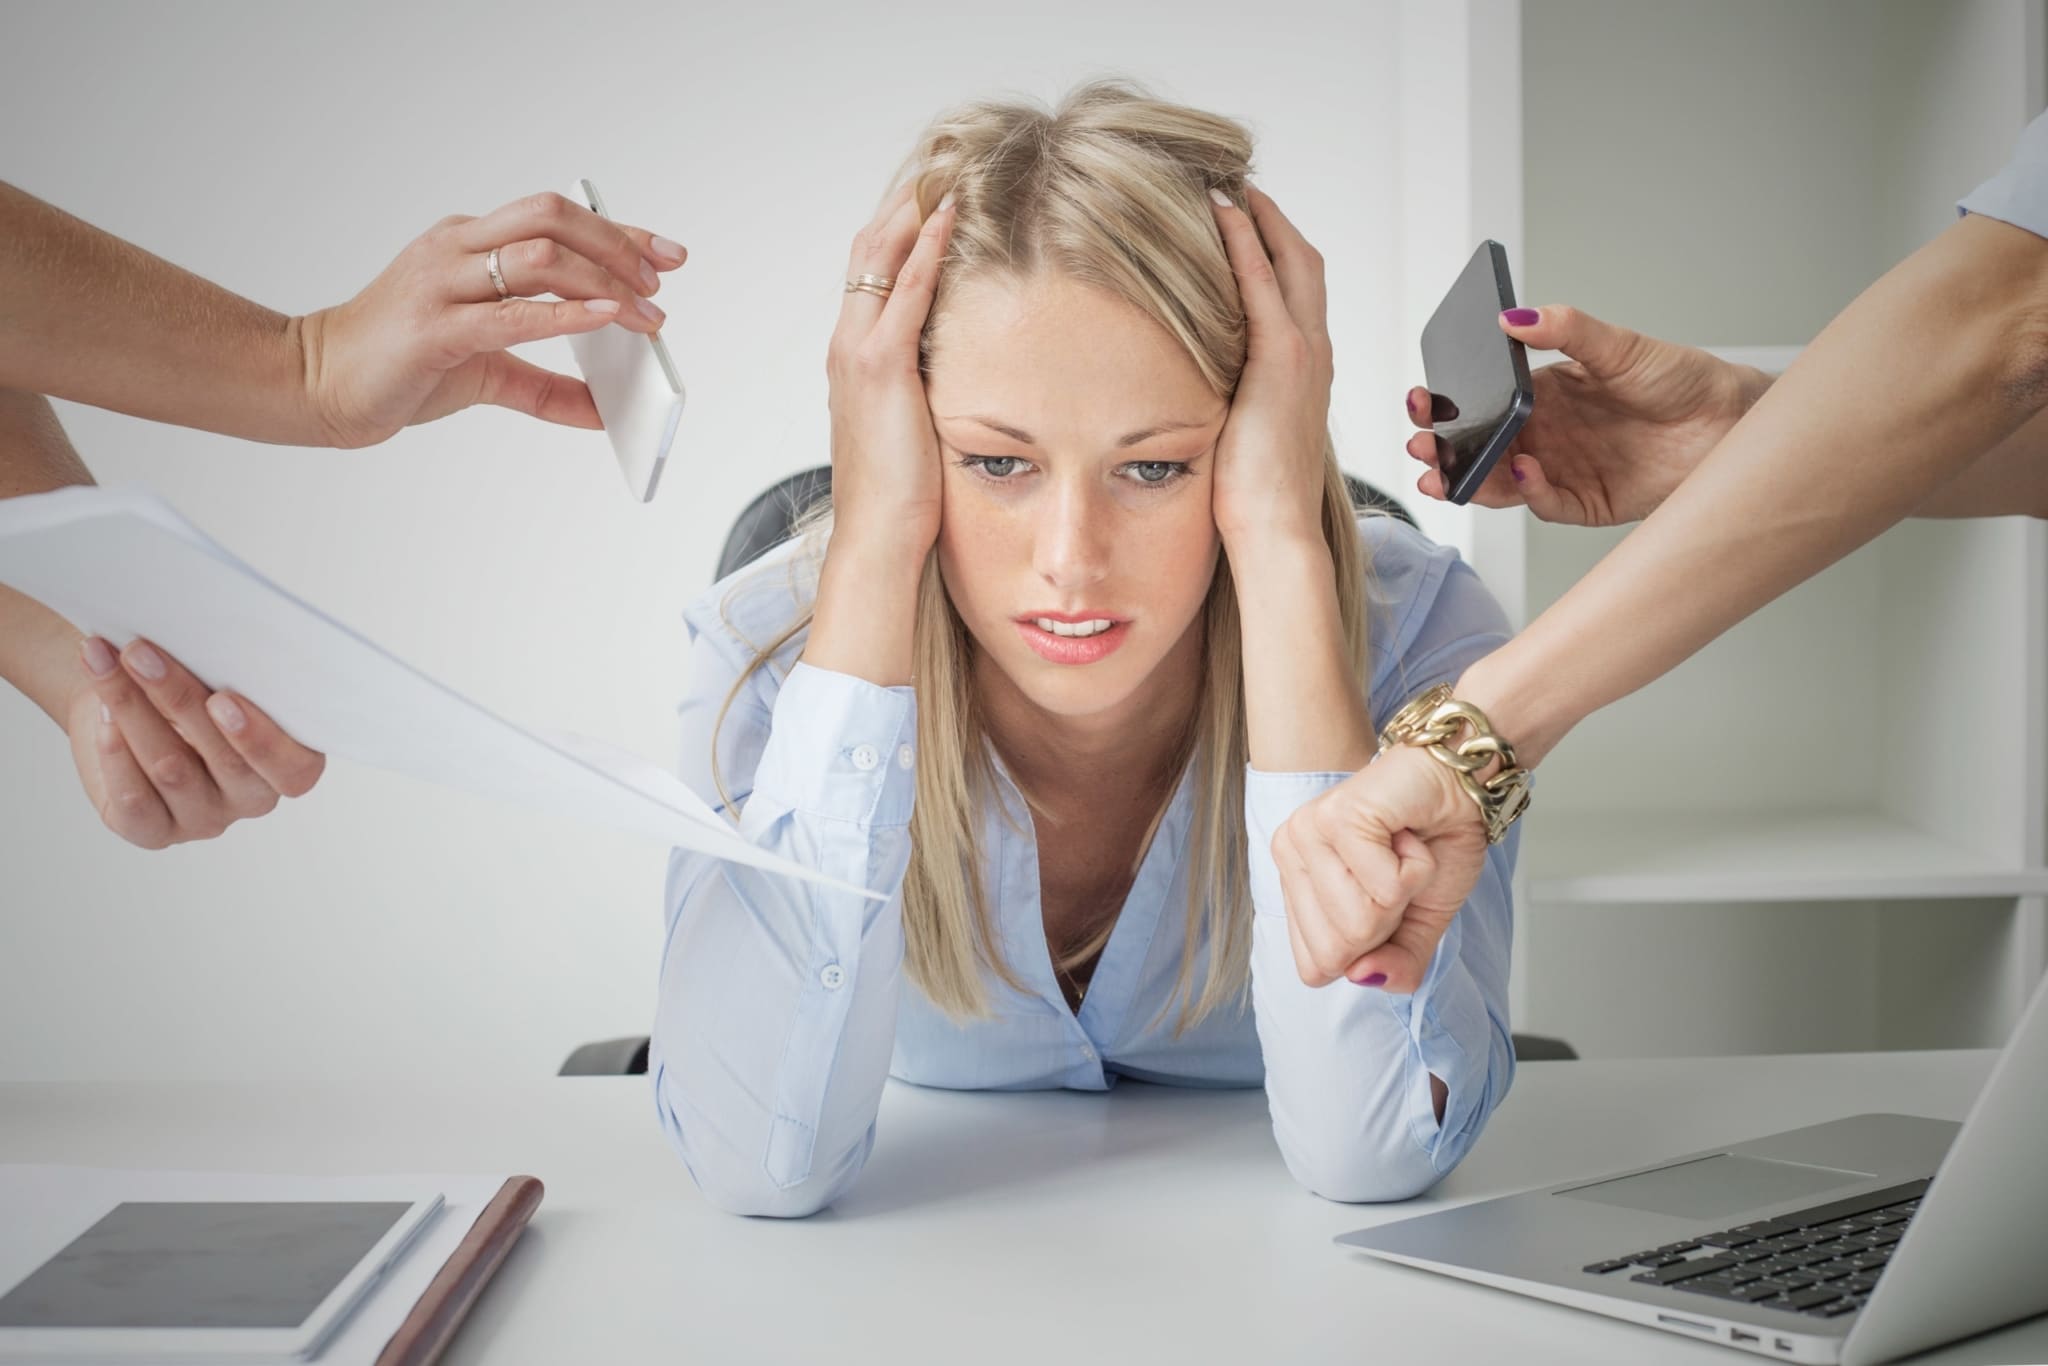 Business woman stressed with numerous people handing her papers and phones